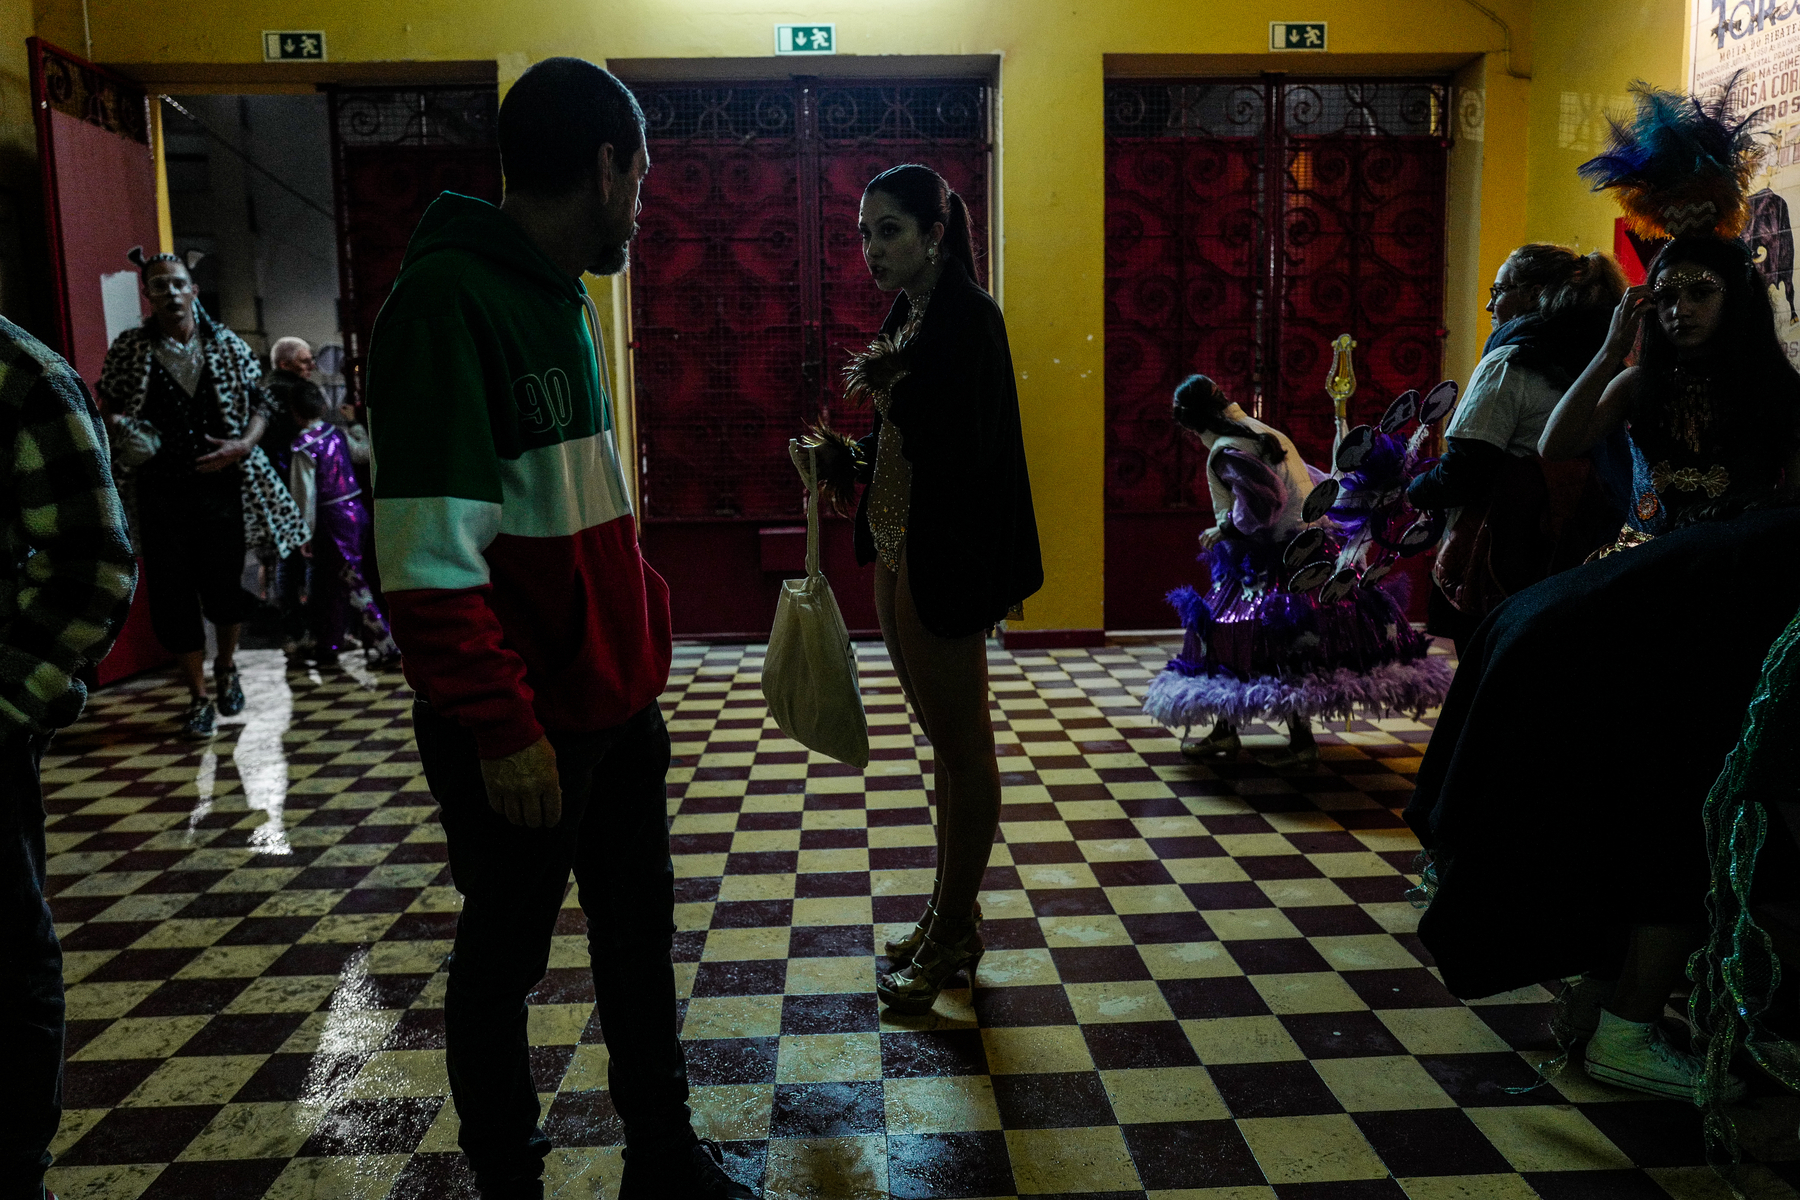 A dimly lit room with a checkered floor where a man and a woman are having a conversation. In the background, individuals dressed in vibrant and elaborate costumes, including feathers, prepare for a performance or festivity.